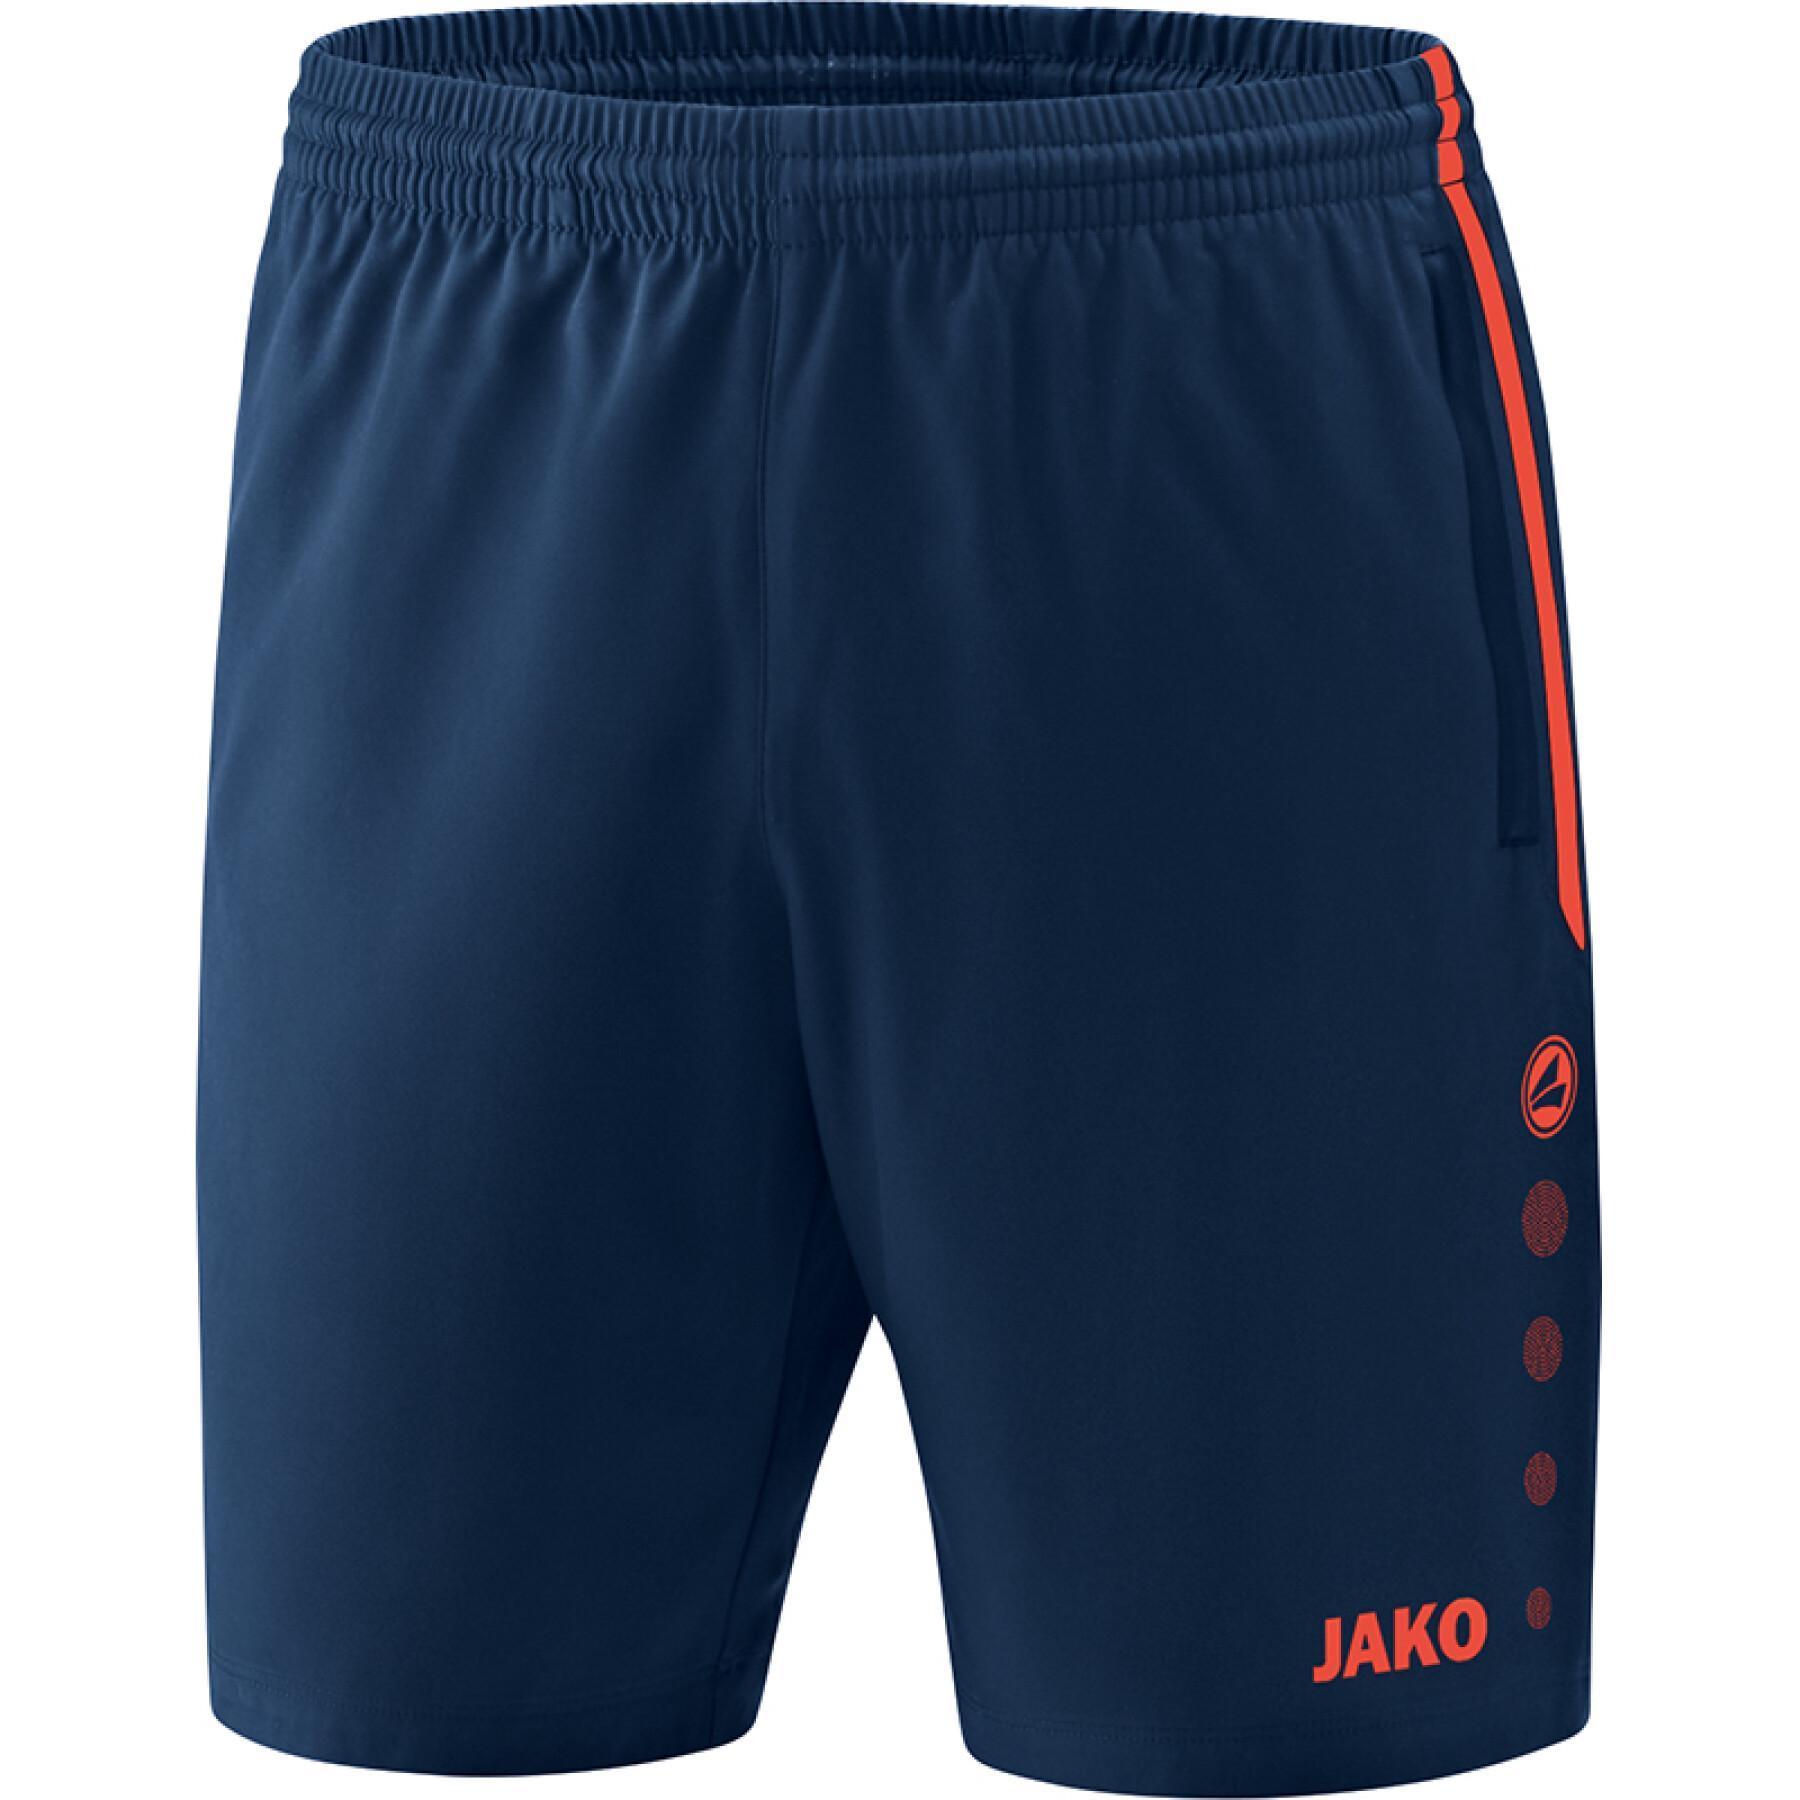 Women's shorts Jako Competition 2.0